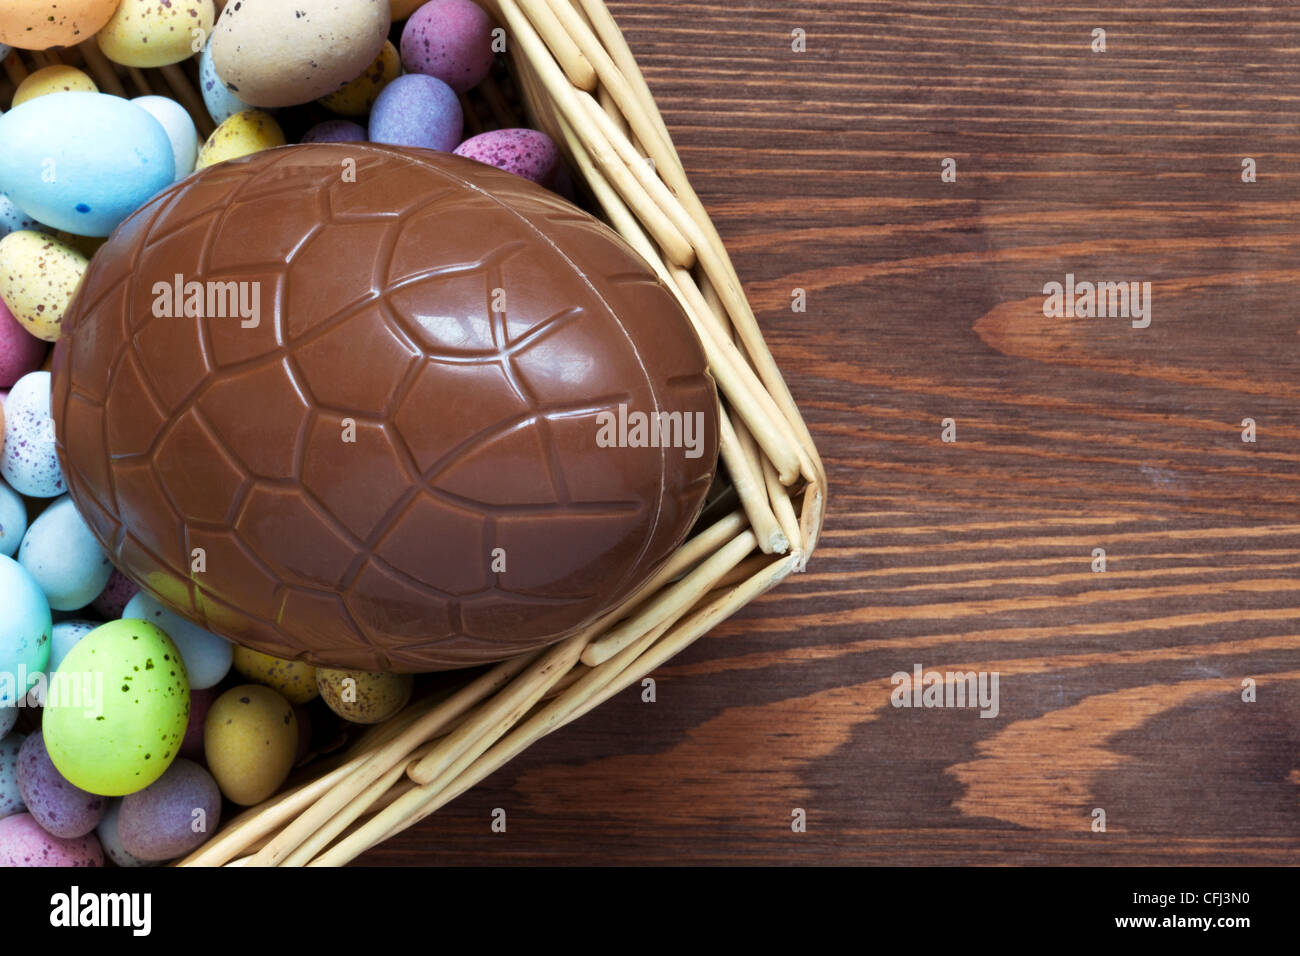 Still life photo of a large chocolate easter egg in a basket surrounded by candy covered mini eggs Stock Photo